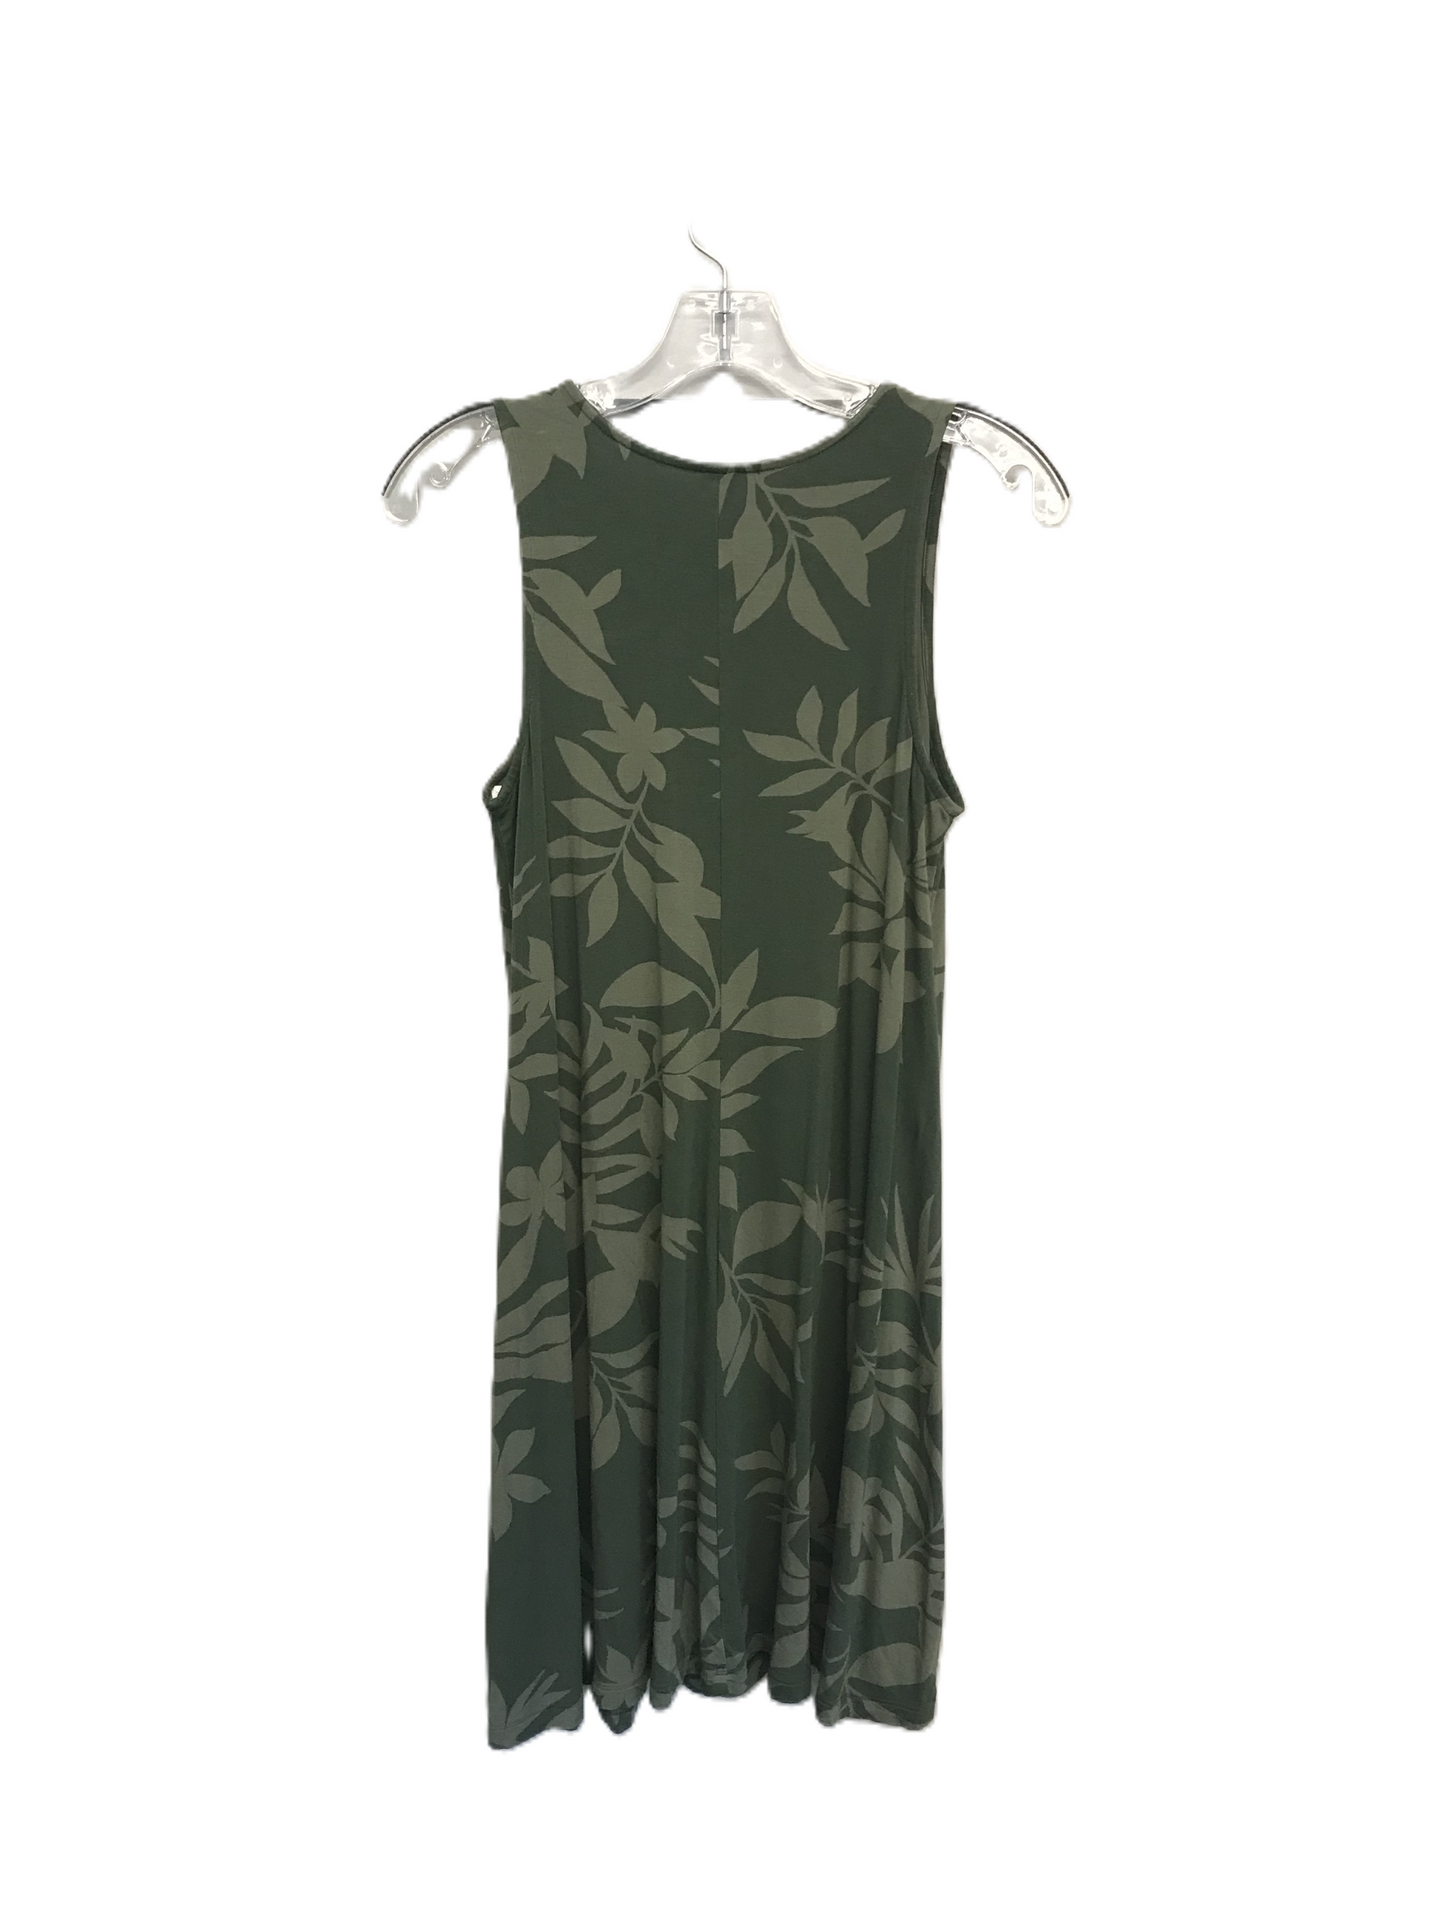 Green Dress Casual Short By Old Navy, Size: S